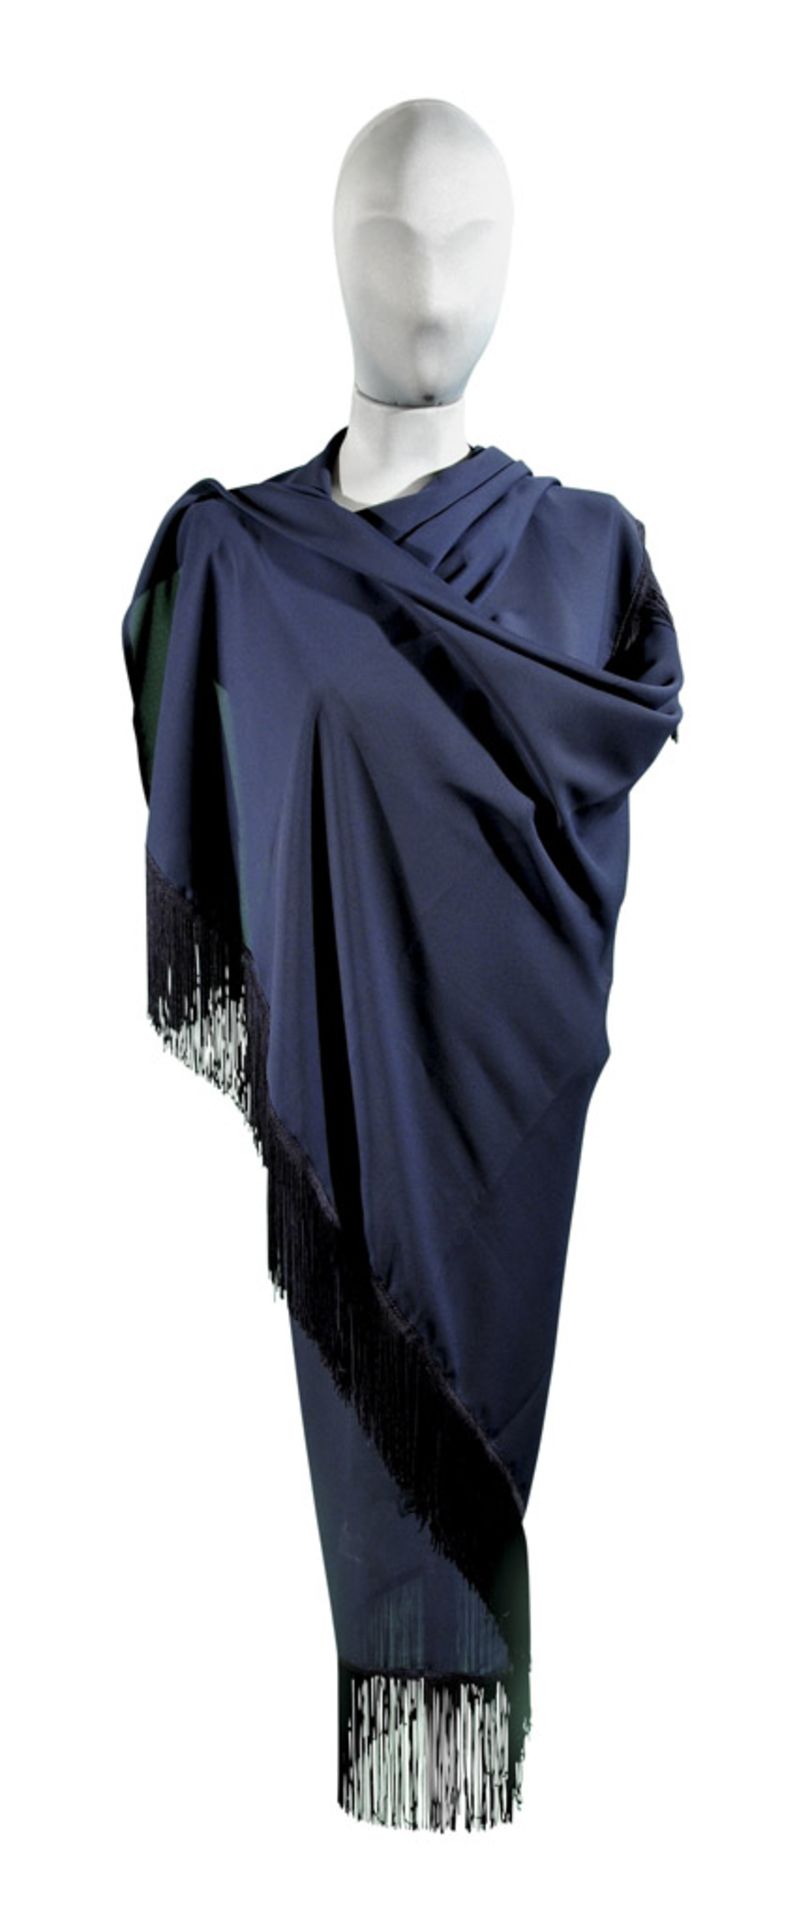 Shawl, 1970s of blue veil with fringes. SCIALLE, ANNI '70 di velo blu con frange.